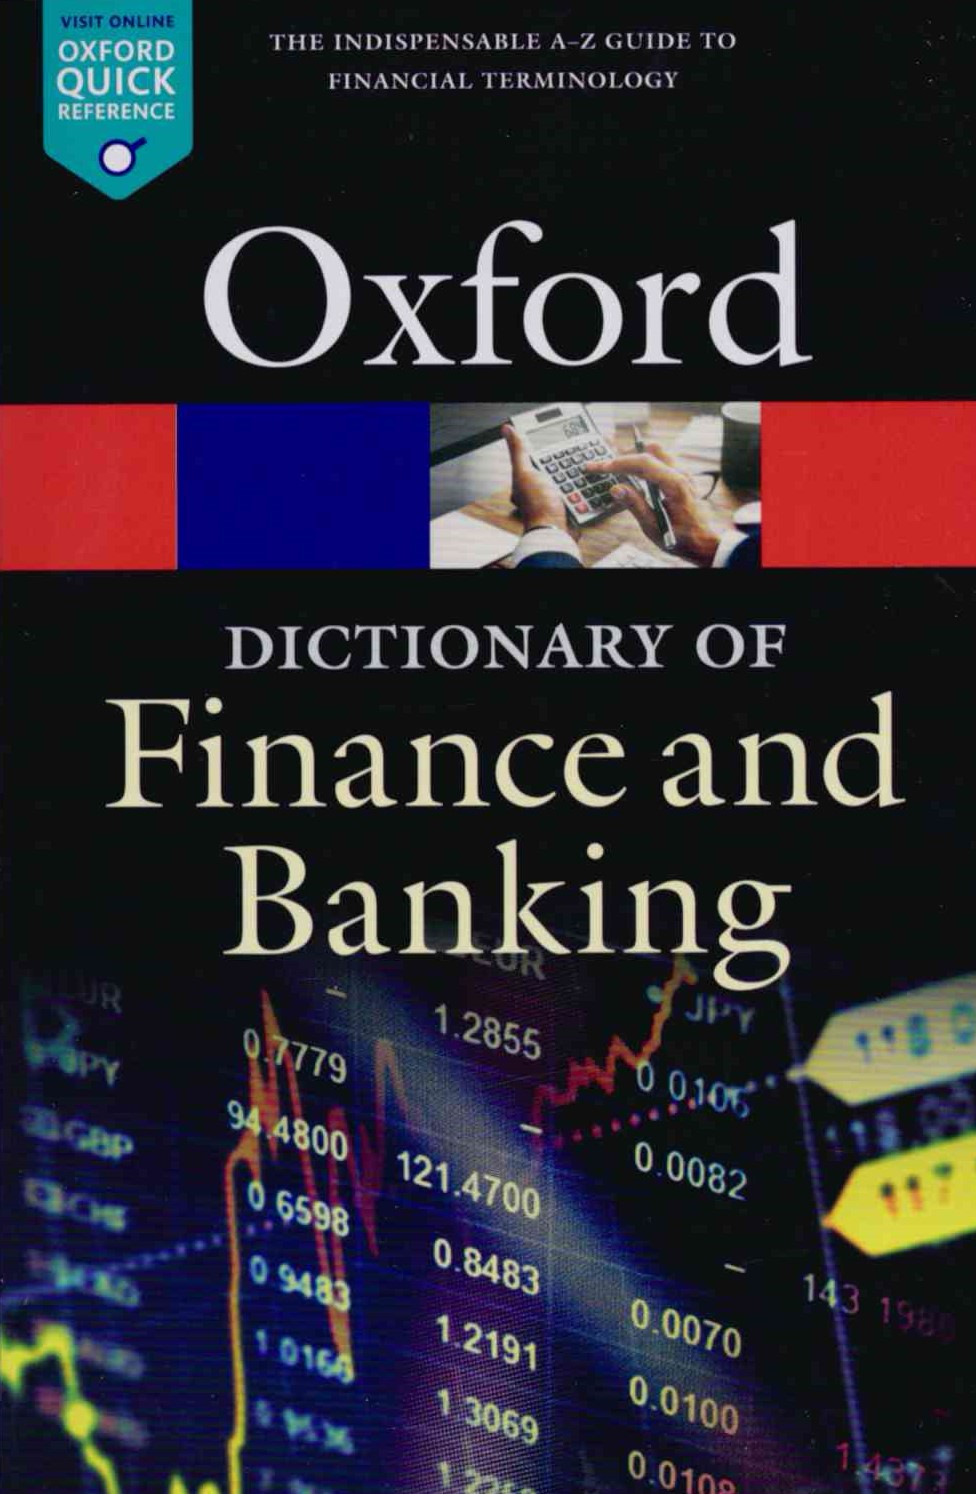 Oxford Dictionary of Finance and Banking (6th edition)